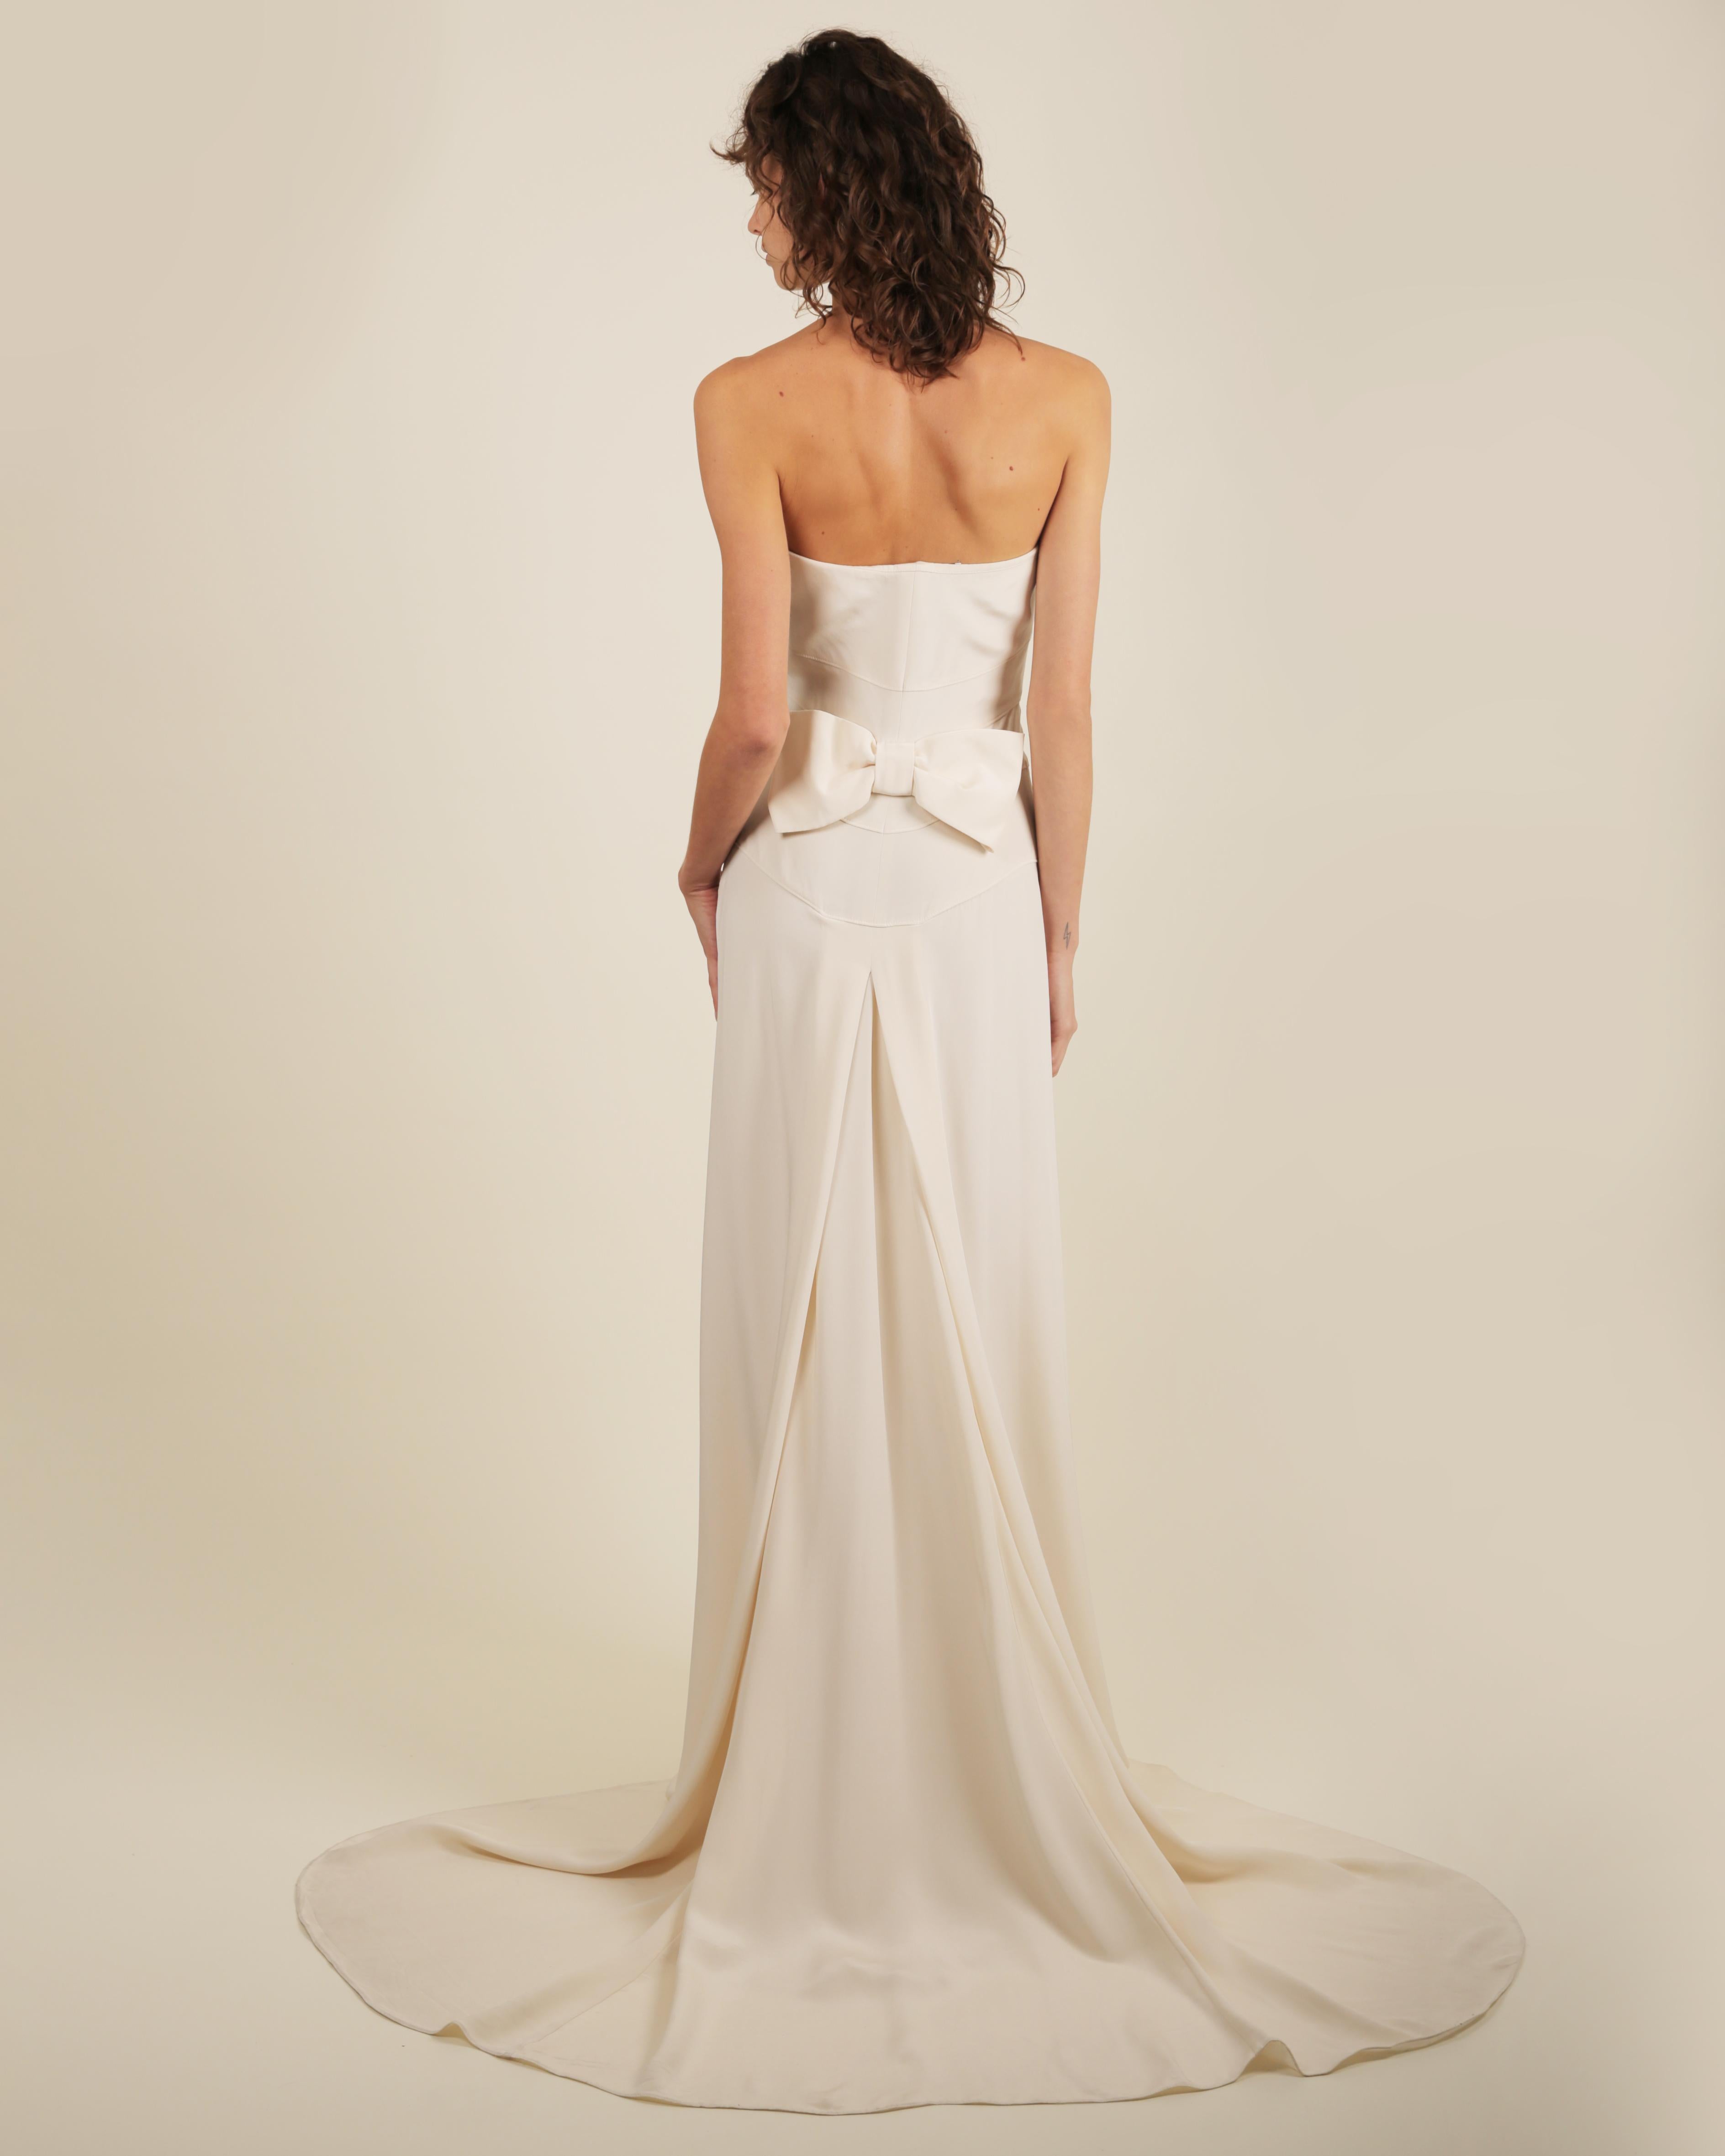 LOVE LALI Vintage

A beautifully minimalist wedding gown by Valentino, simple and elegant.
Ivory strapless dress in silk that has slight stretch
Hugs the body and hips and then flares out to a skirt that has a beautiful long train
Horizontal seams